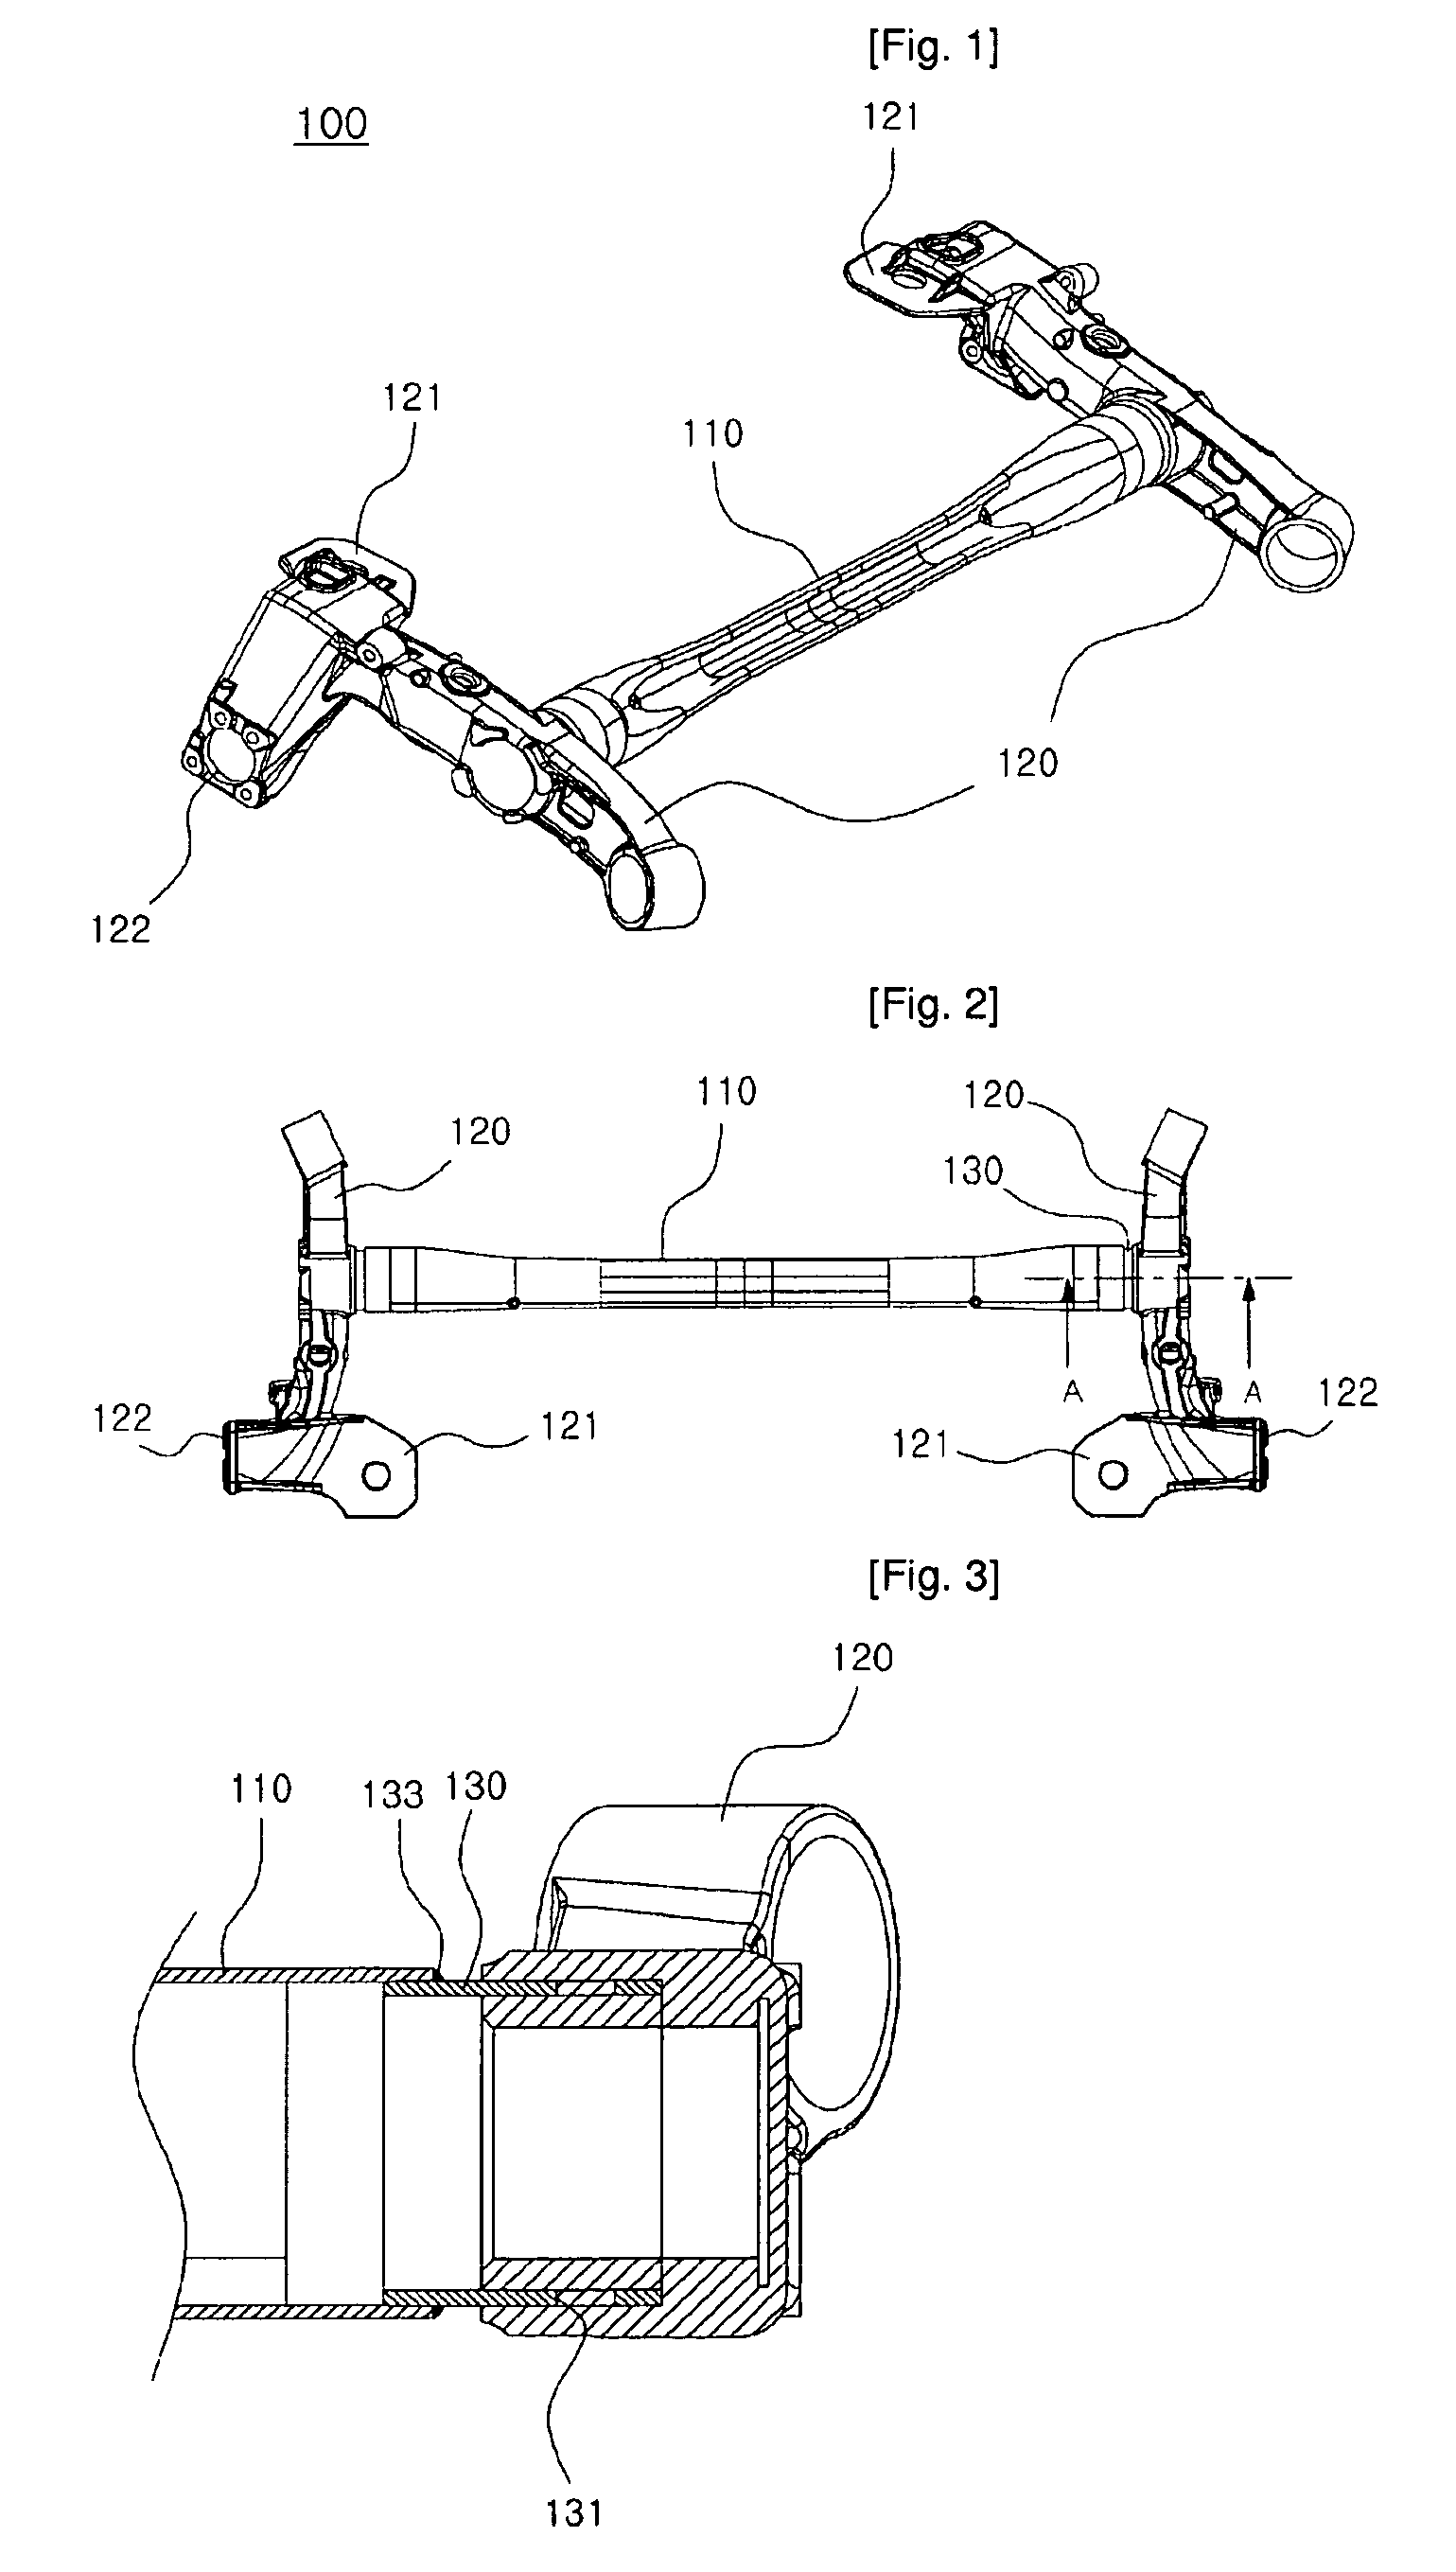 Torsion beam axle having connecting tube between torsion beam and trailing arm